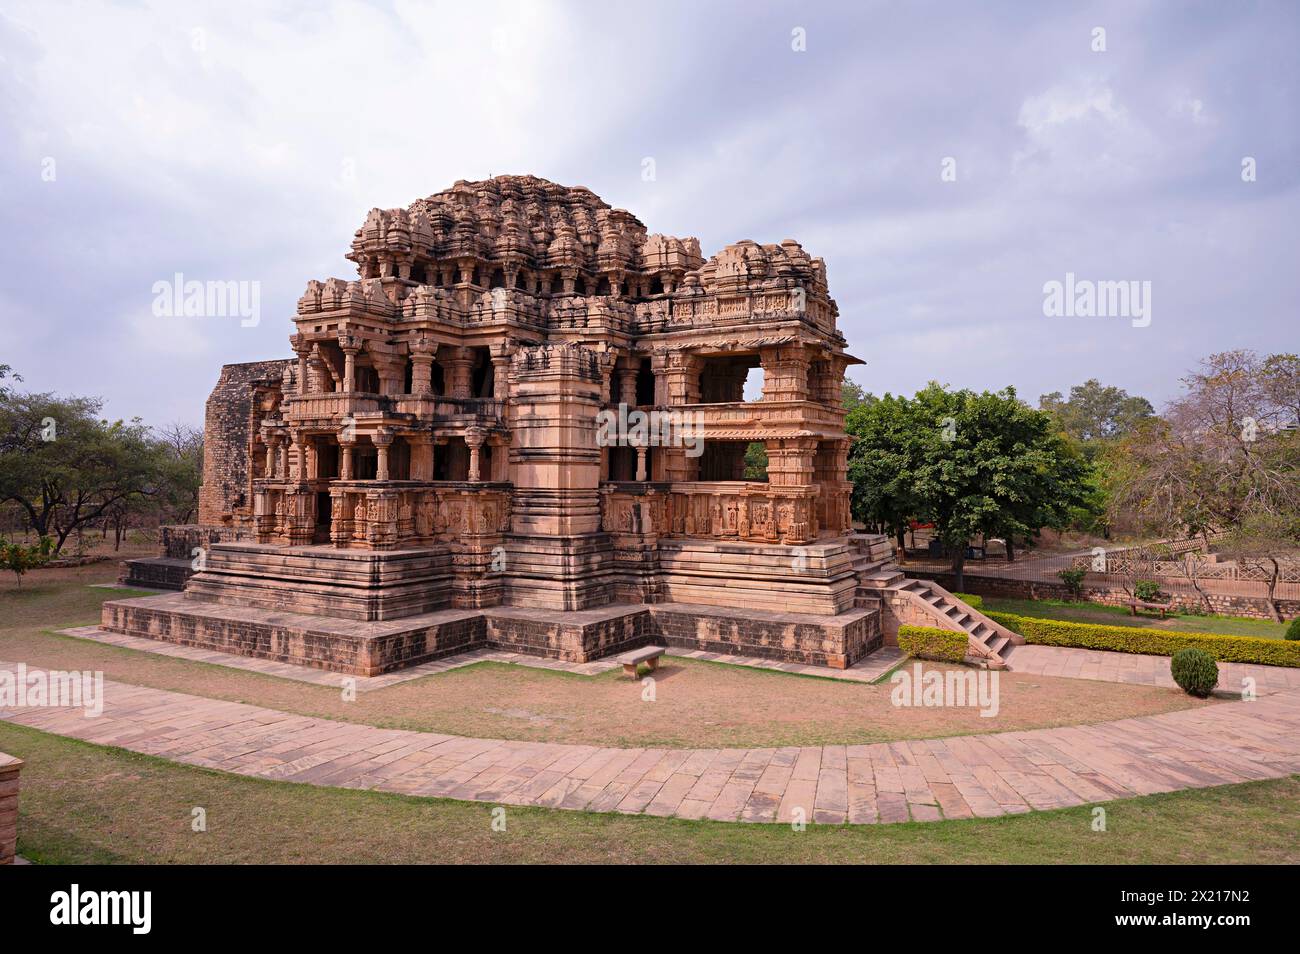 Temple SAS Bahu, complexe fort, Gwalior, Madhya Pradesh, Inde Banque D'Images